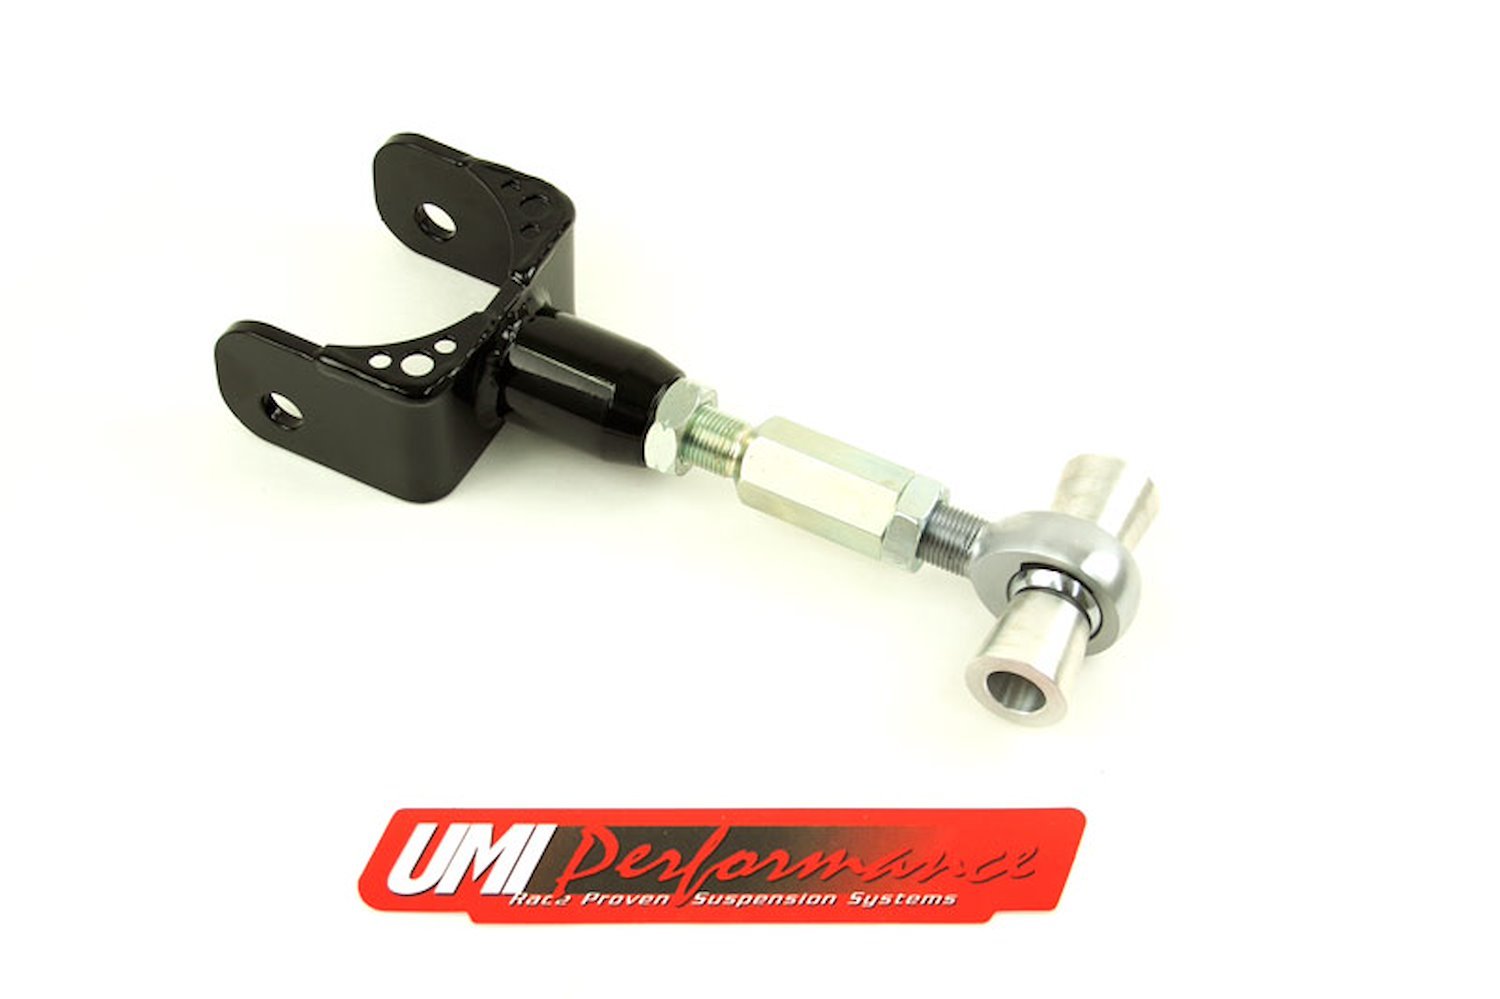 UMI?s adjustable upper rear control arm for the 2011-2014 Ford Mustang replaces the factory stamped